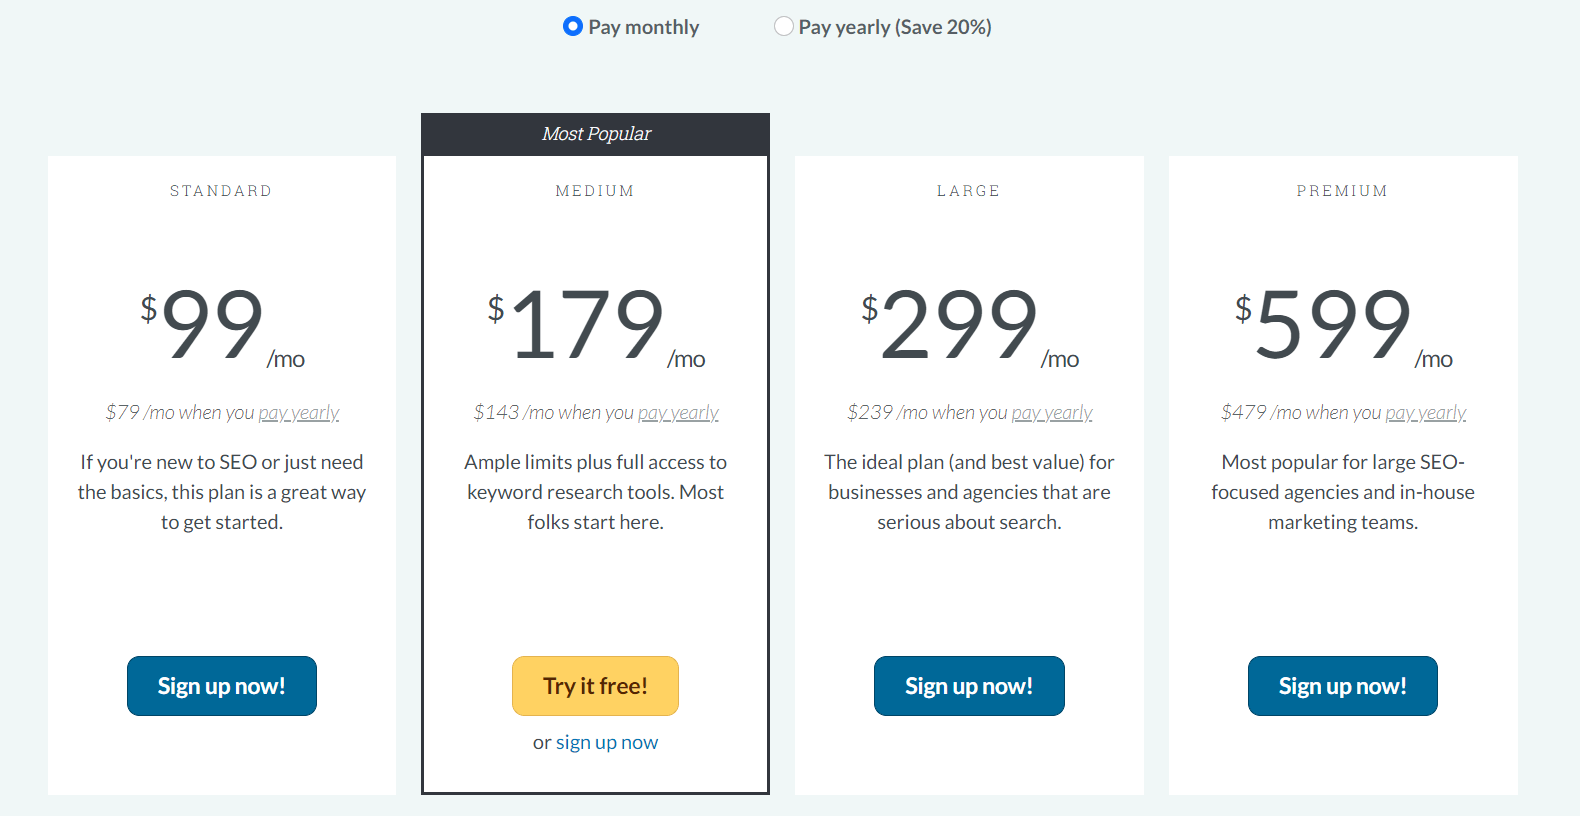 Image showing the pricing plans of MozPro